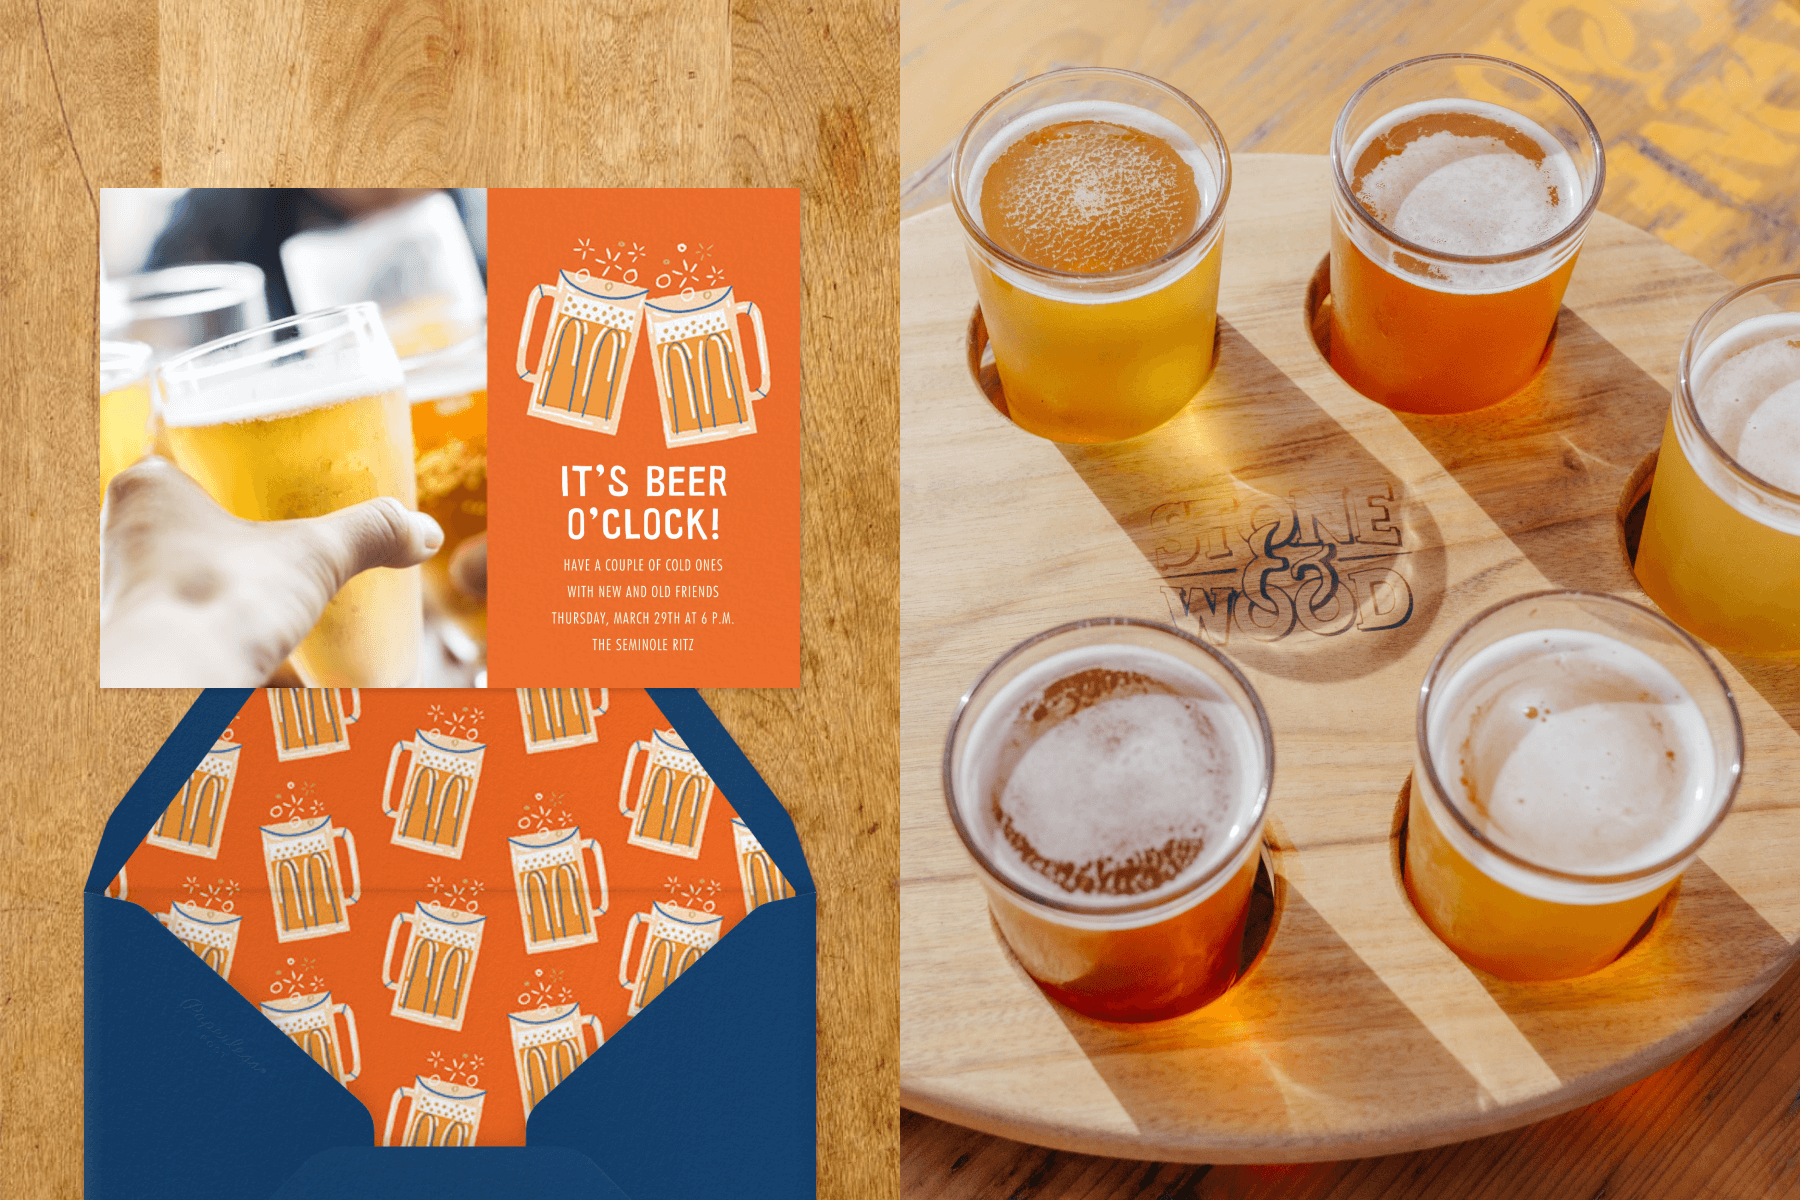 Left: An invitation reads “it’s beer o’clock” with a photo of beer glasses being clinked on the left and an orange illustration of two beer mugs on the right and a matching blue envelope. Right: Five beer glasses with different color beers are shown on a round wooden tray.